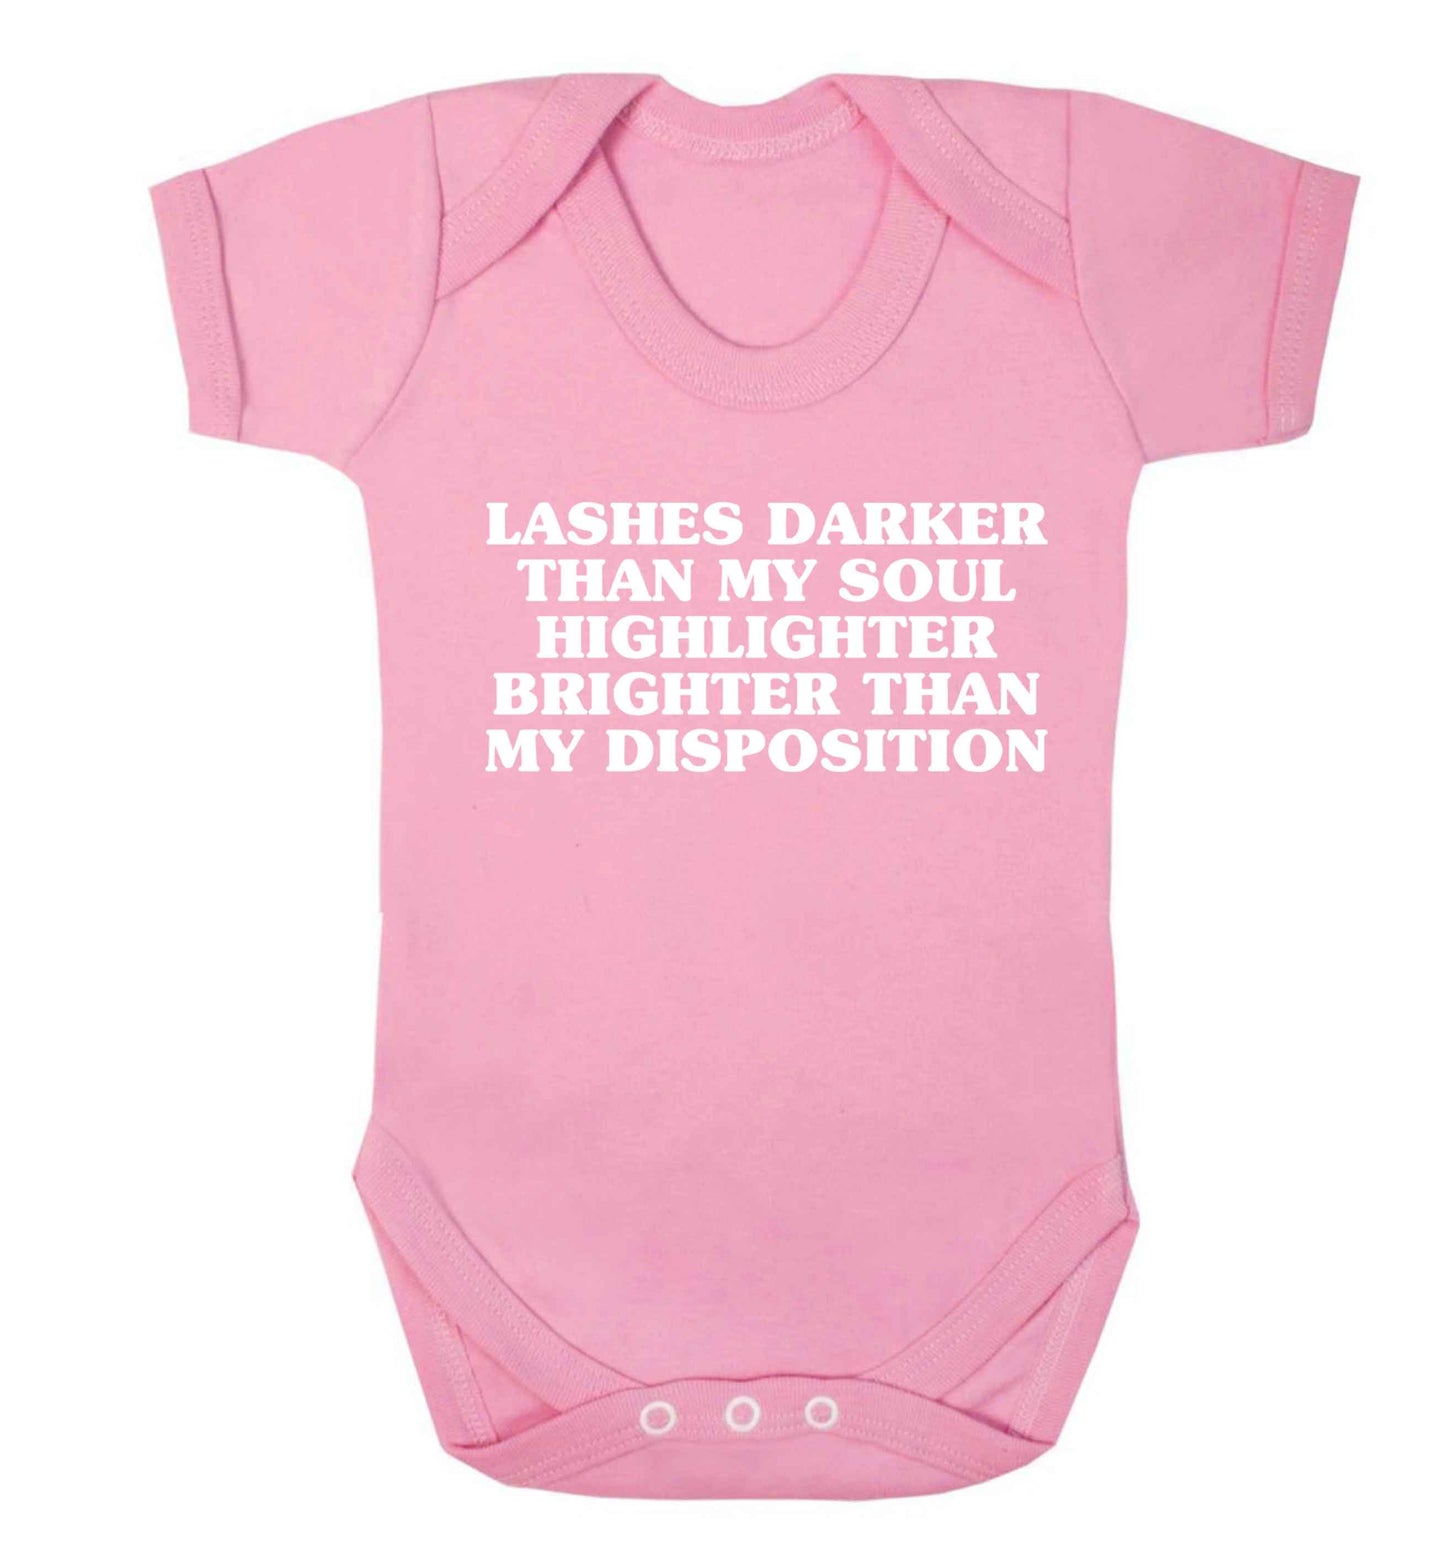 Lashes darker than my soul, highlighter brighter than my disposition Baby Vest pale pink 18-24 months